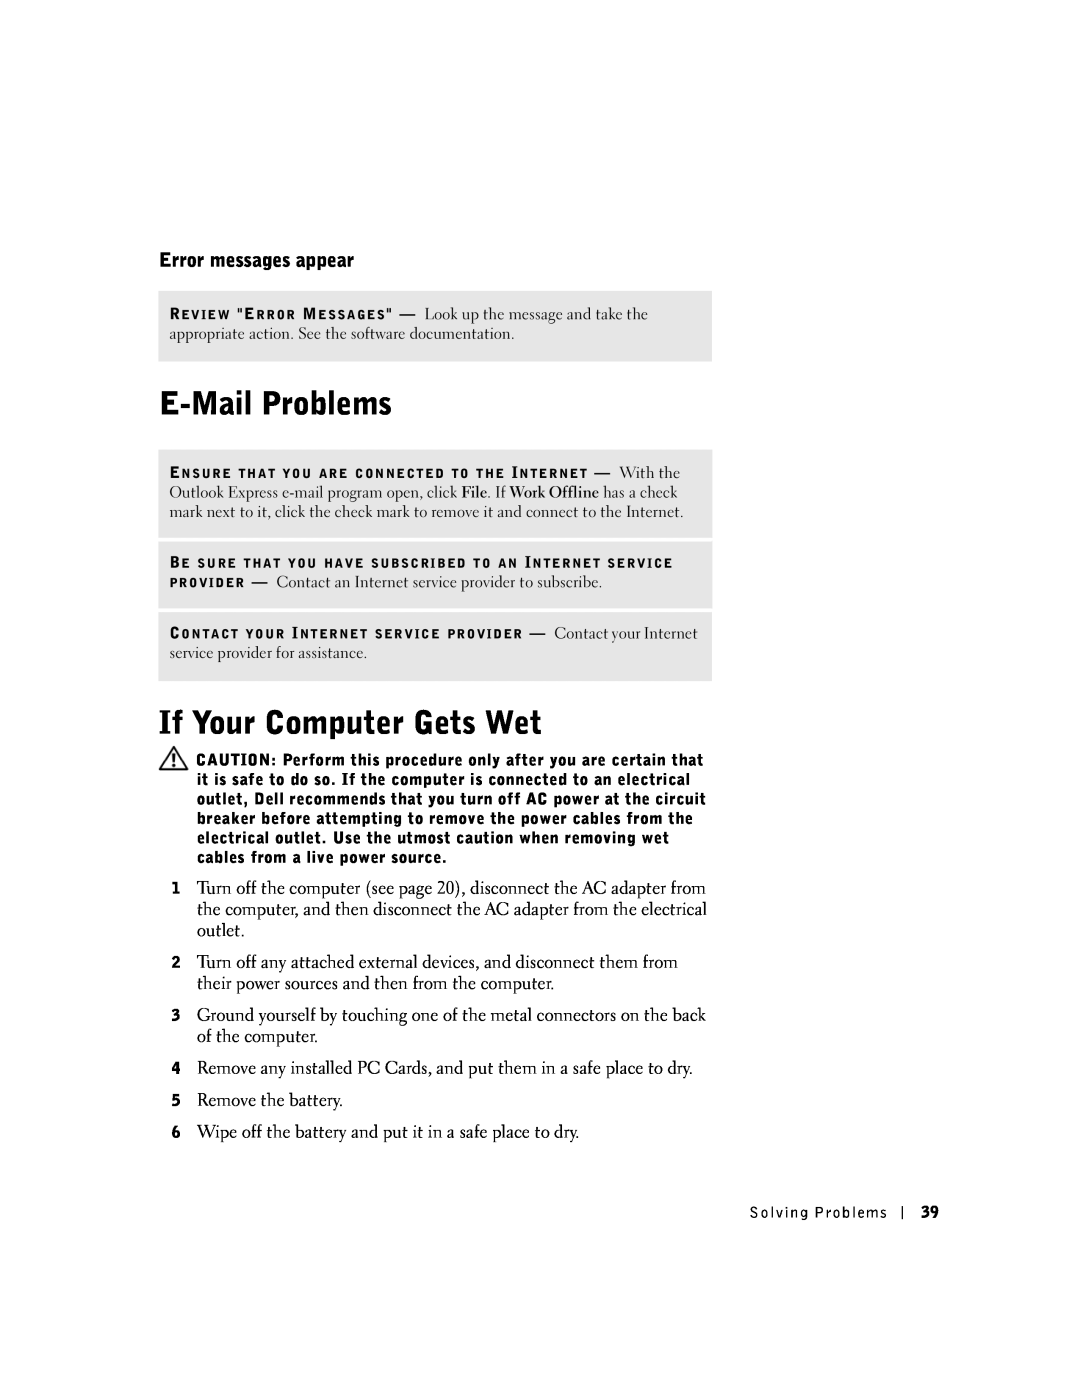 Dell 100N owner manual E-Mail Problems, If Your Computer Gets Wet, Error messages appear 